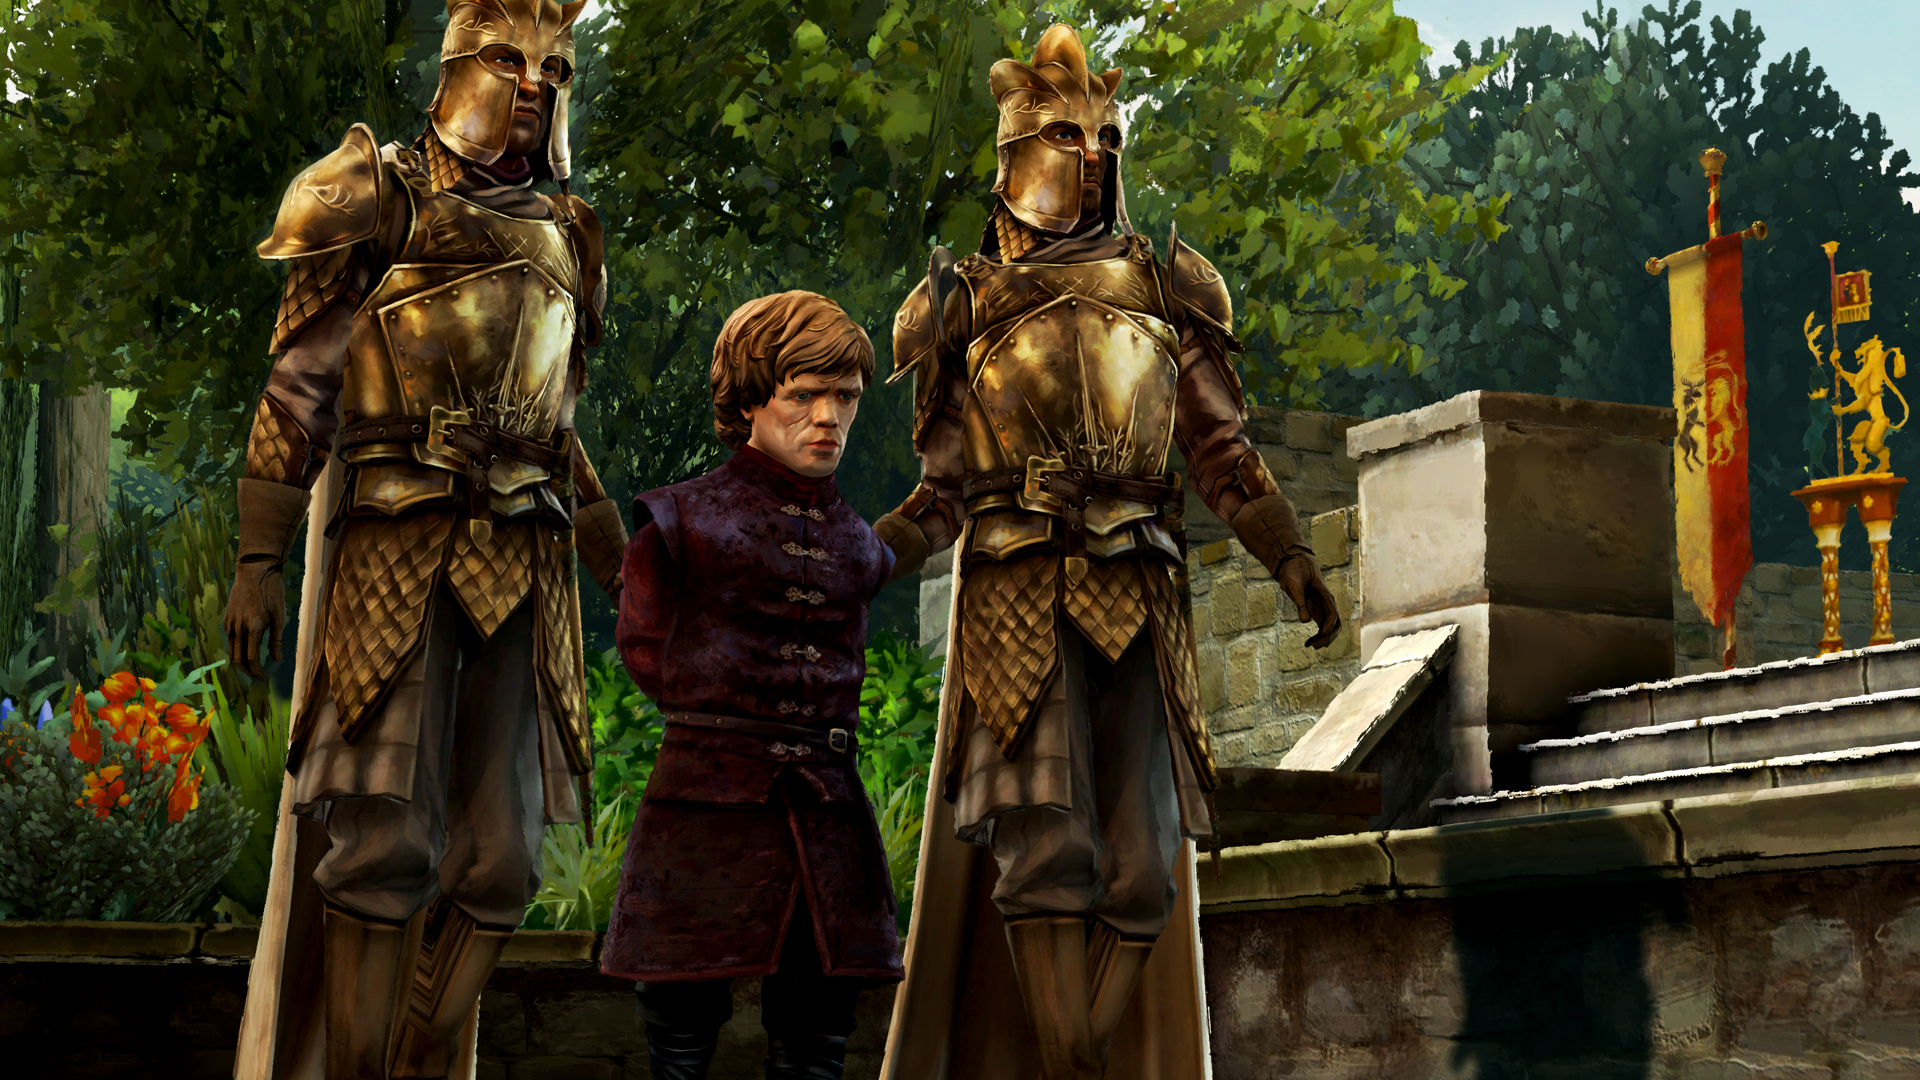 Best Game of Thrones games: Telltale's Game of Thrones. Image shows Tyrion Lannister being arrested.